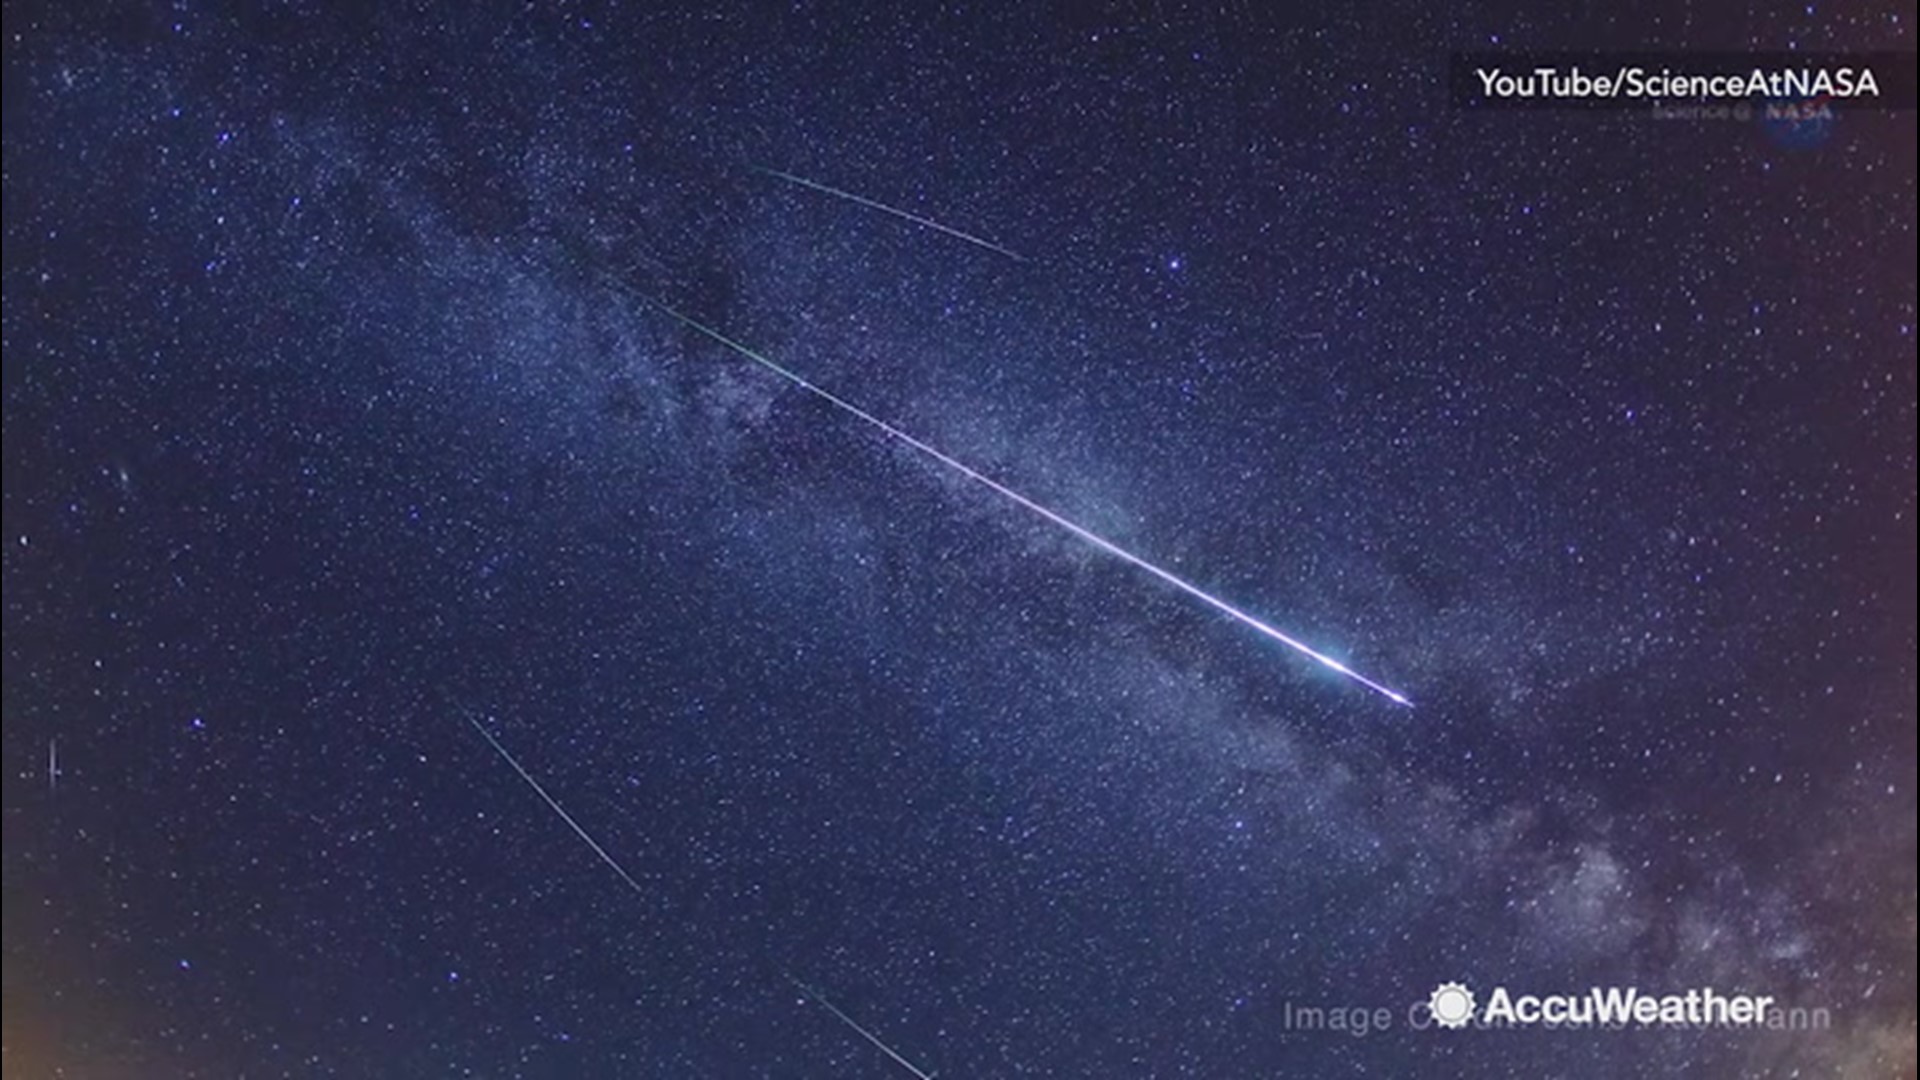 The Perseid meteor shower is one of the most popular astronomy events in the night sky. Peak shower is typically a hundred meteors per hour on a clear summer night, but the moon will wash out some of the meteors. Here's how you can still enjoy the show.